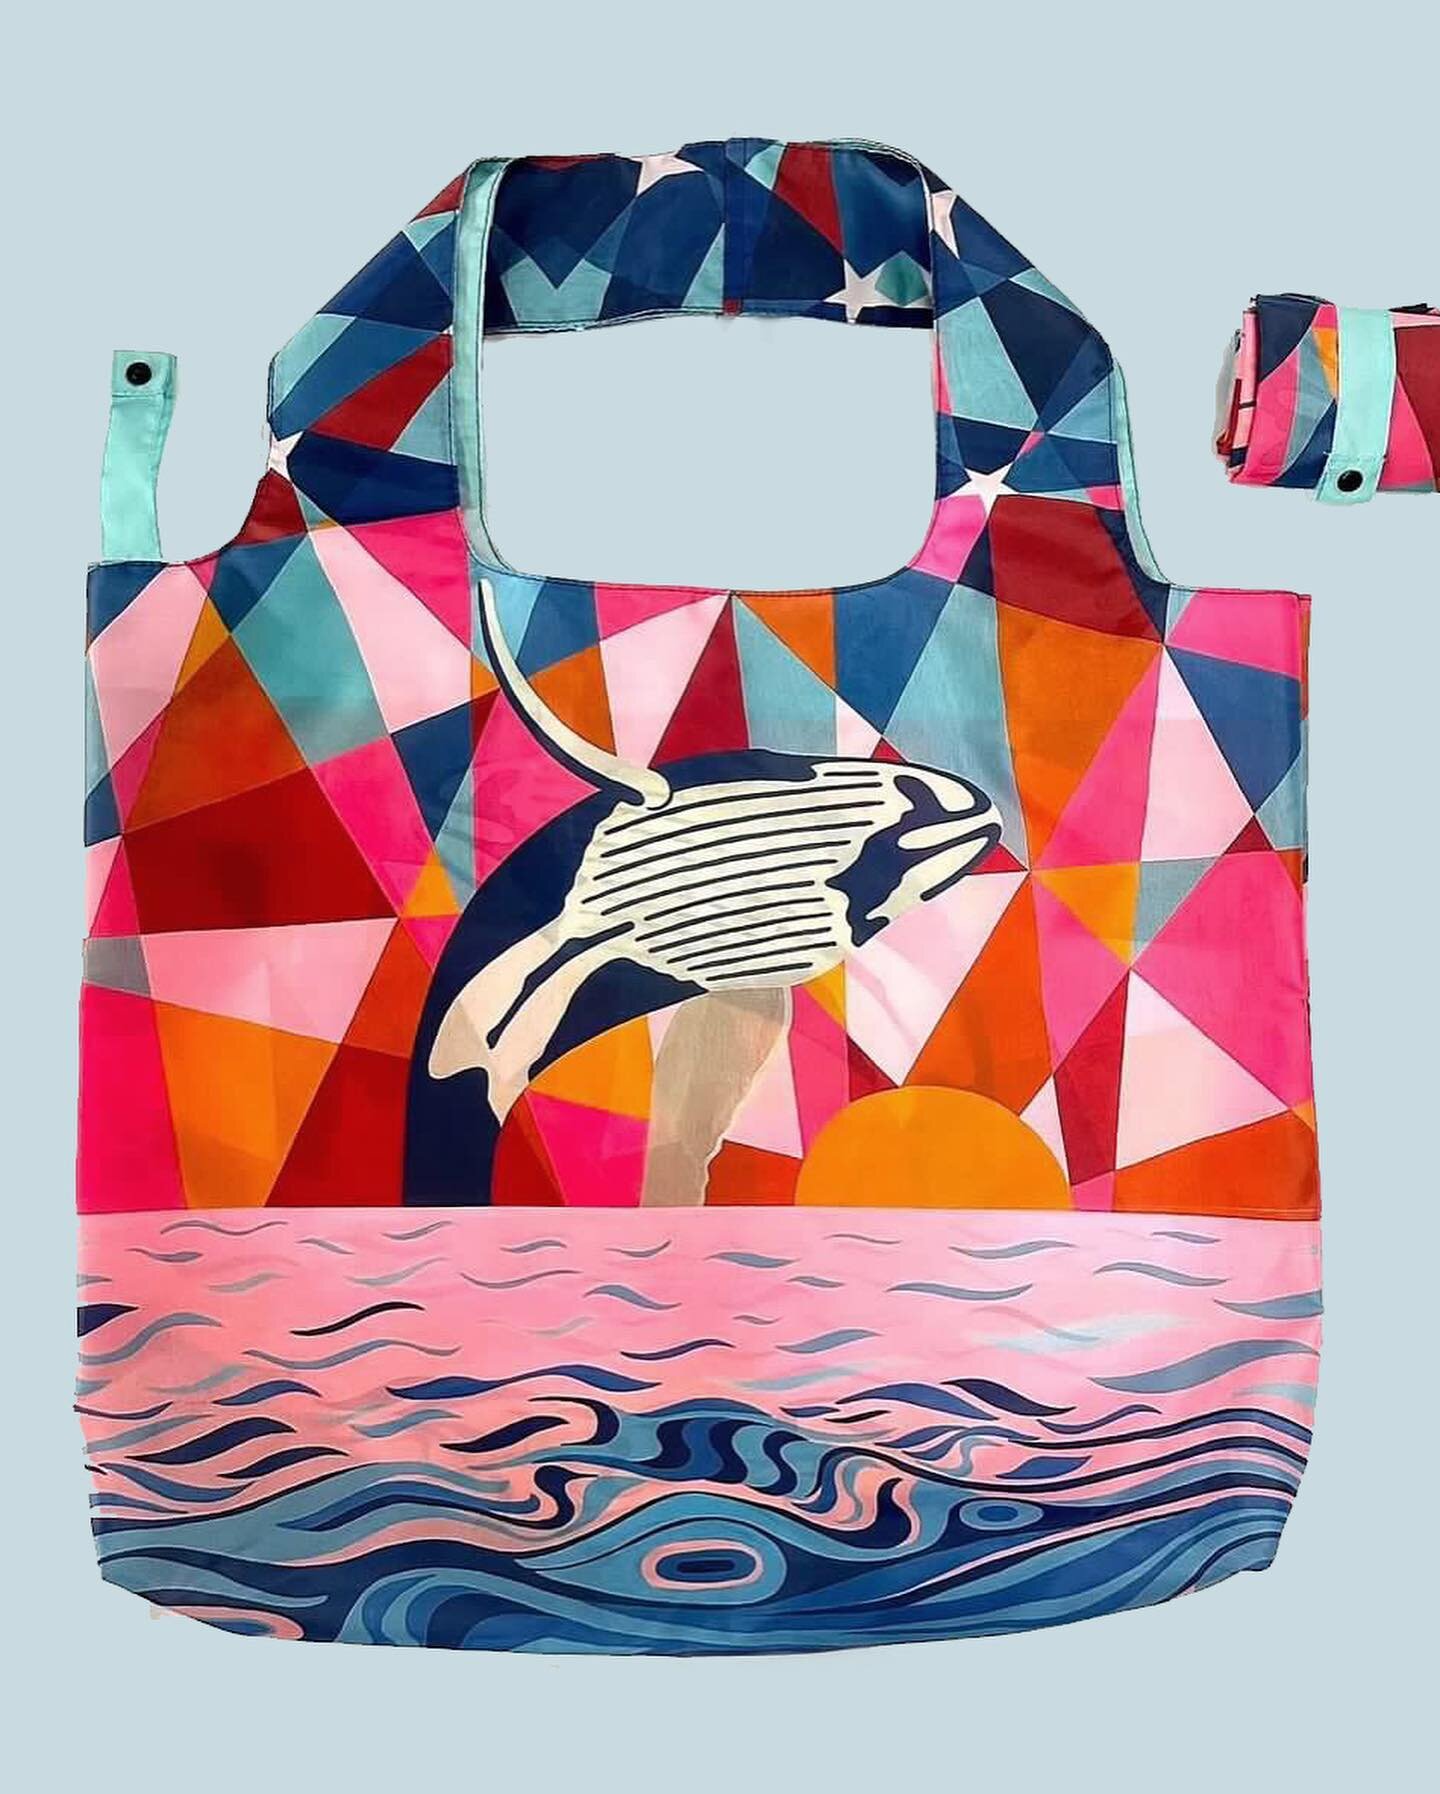 I&rsquo;m super excited to see my artwork on the lovely lei sacs of @halepuahawaii 
.
There are four designs available for preorder (see link in my story):
-Breach for the Stars
-Wahine
-Mt Ka&rsquo;ala
-Ohia Lēhua
.
Squee! Let me know in the comment